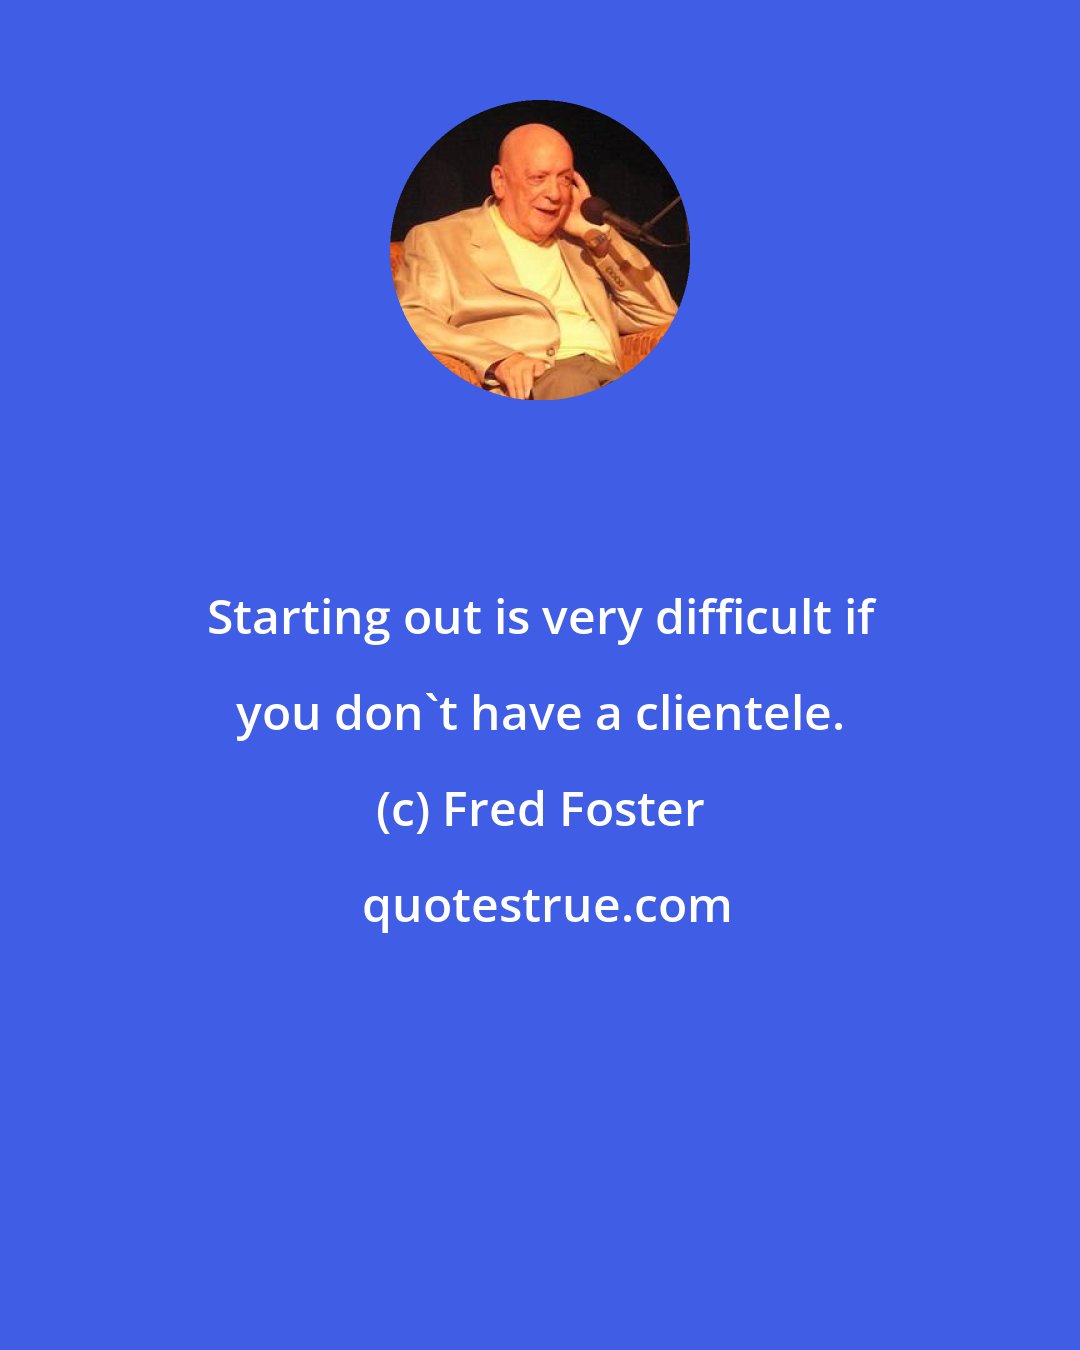 Fred Foster: Starting out is very difficult if you don't have a clientele.